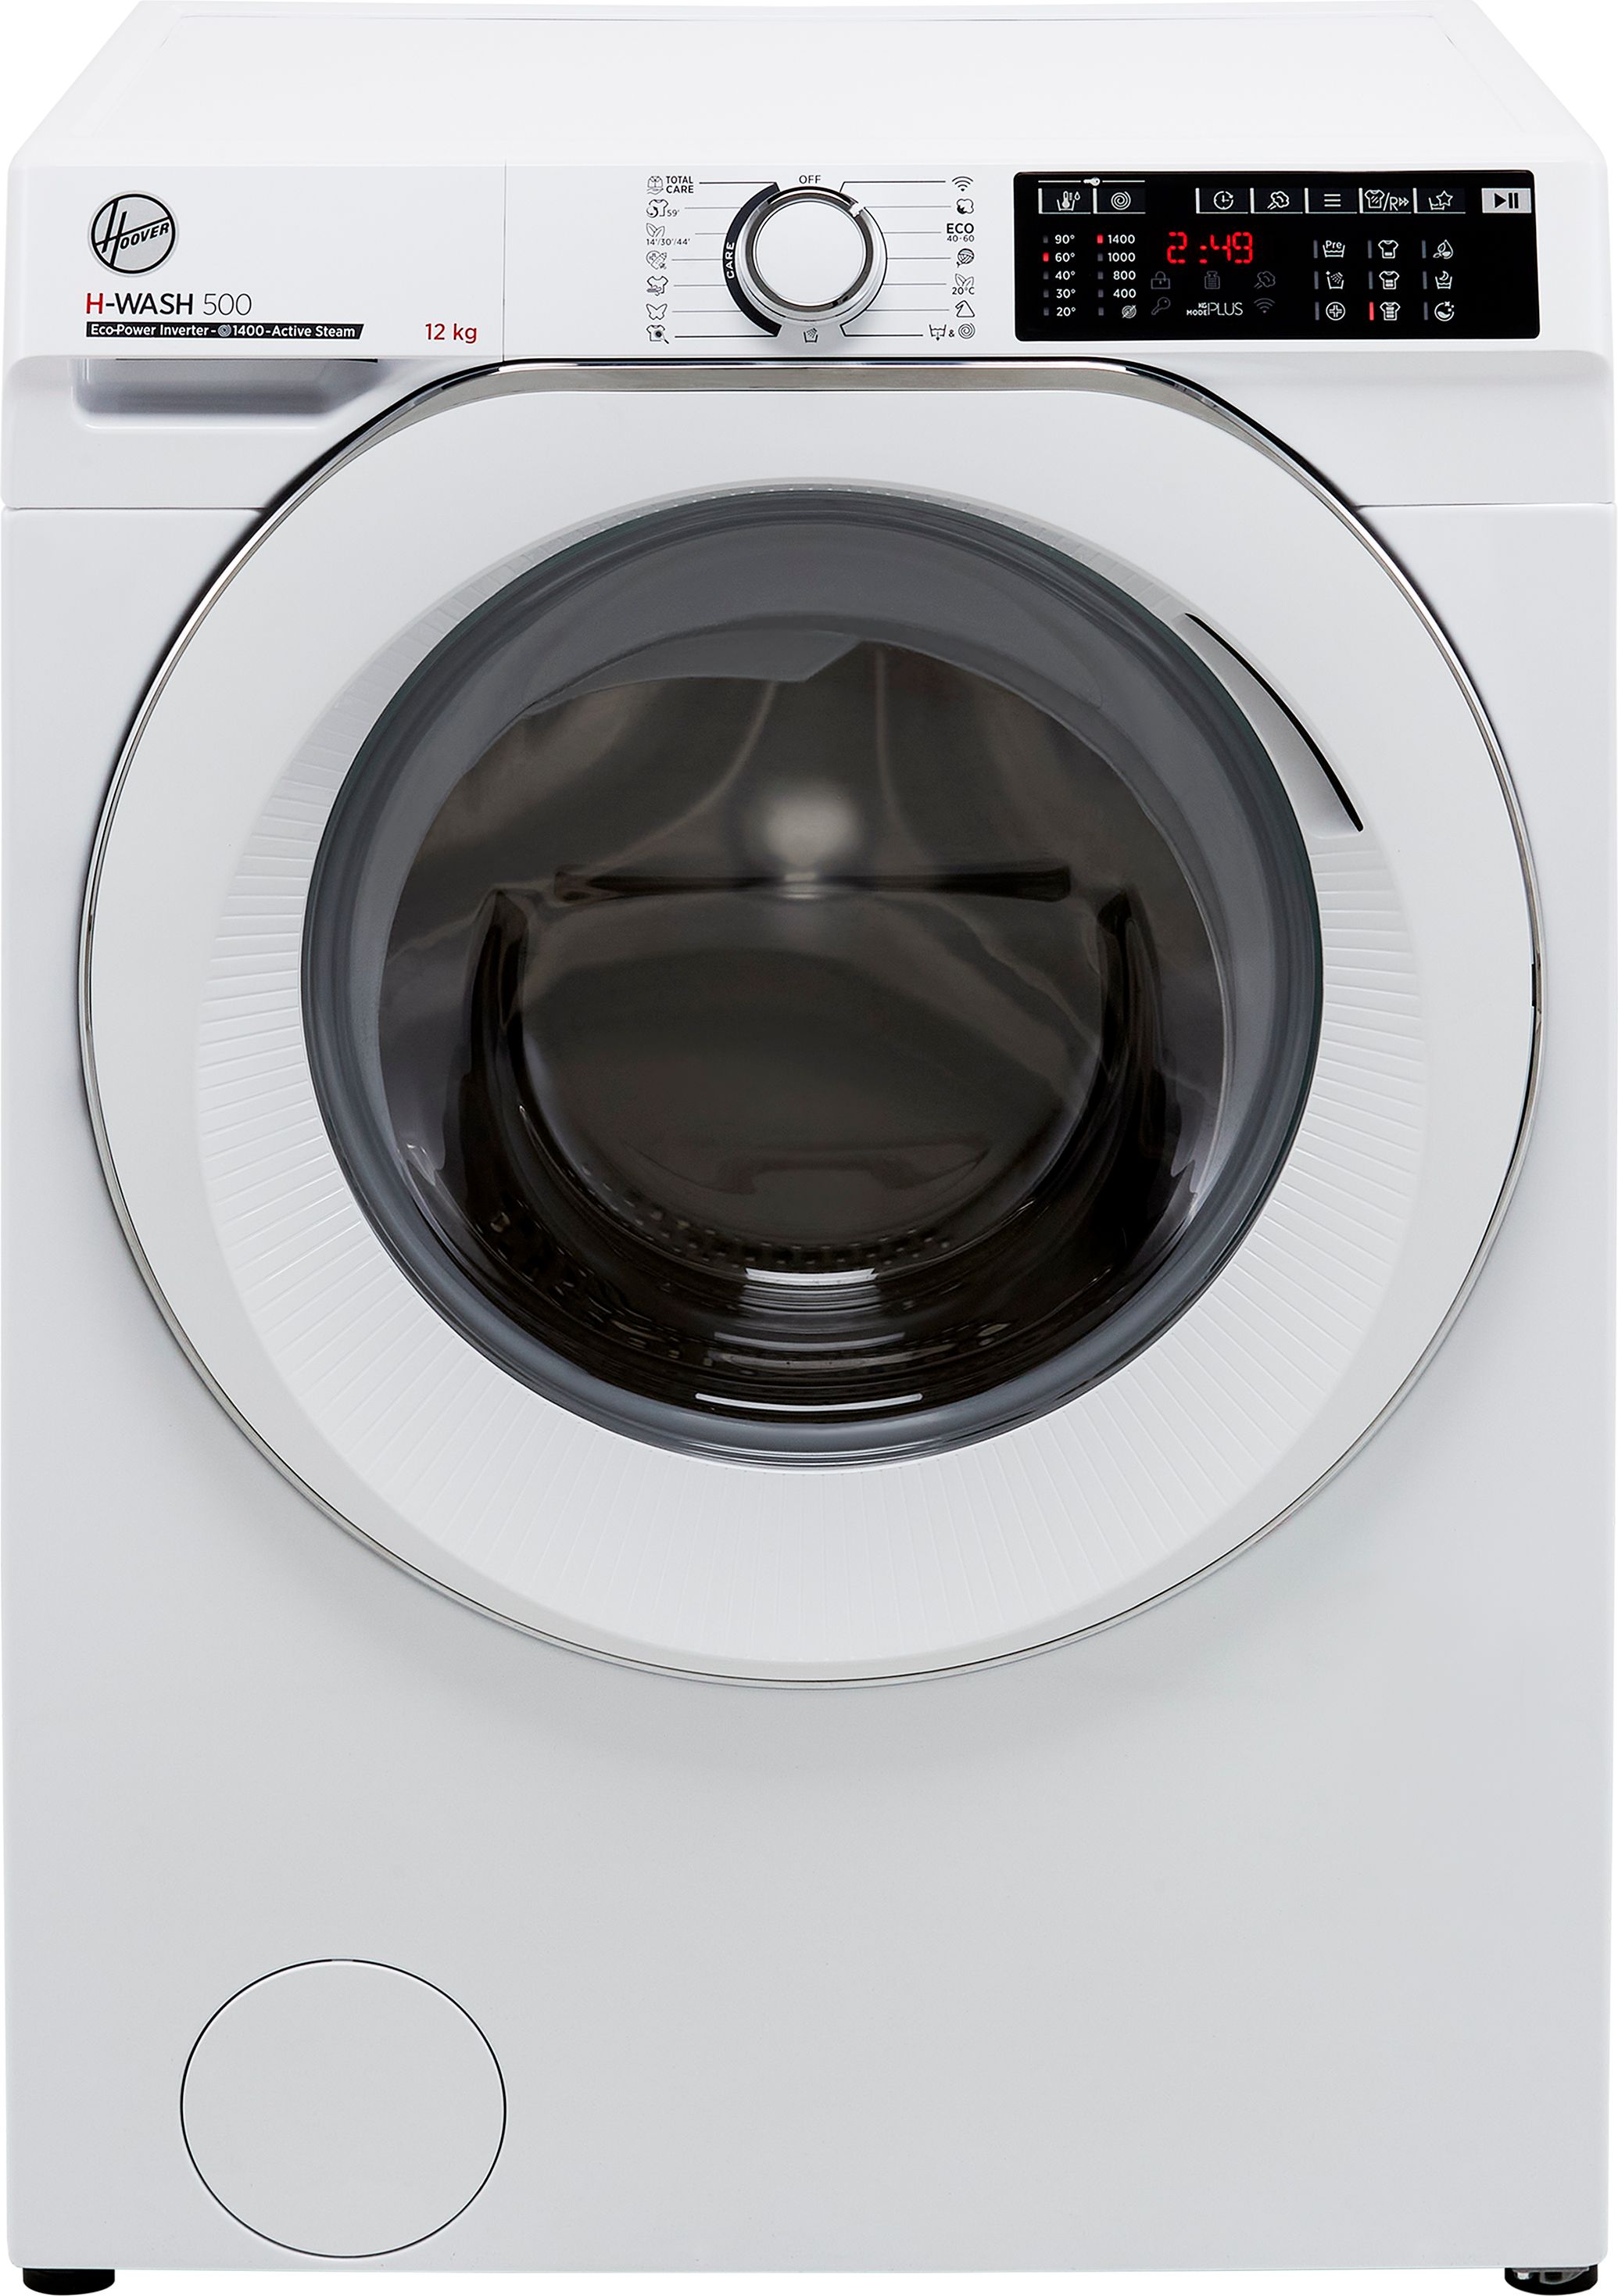 Hoover H-WASH 500 HW412AMC/1 12kg WiFi Connected Washing Machine with 1400 rpm - White - A Rated, White